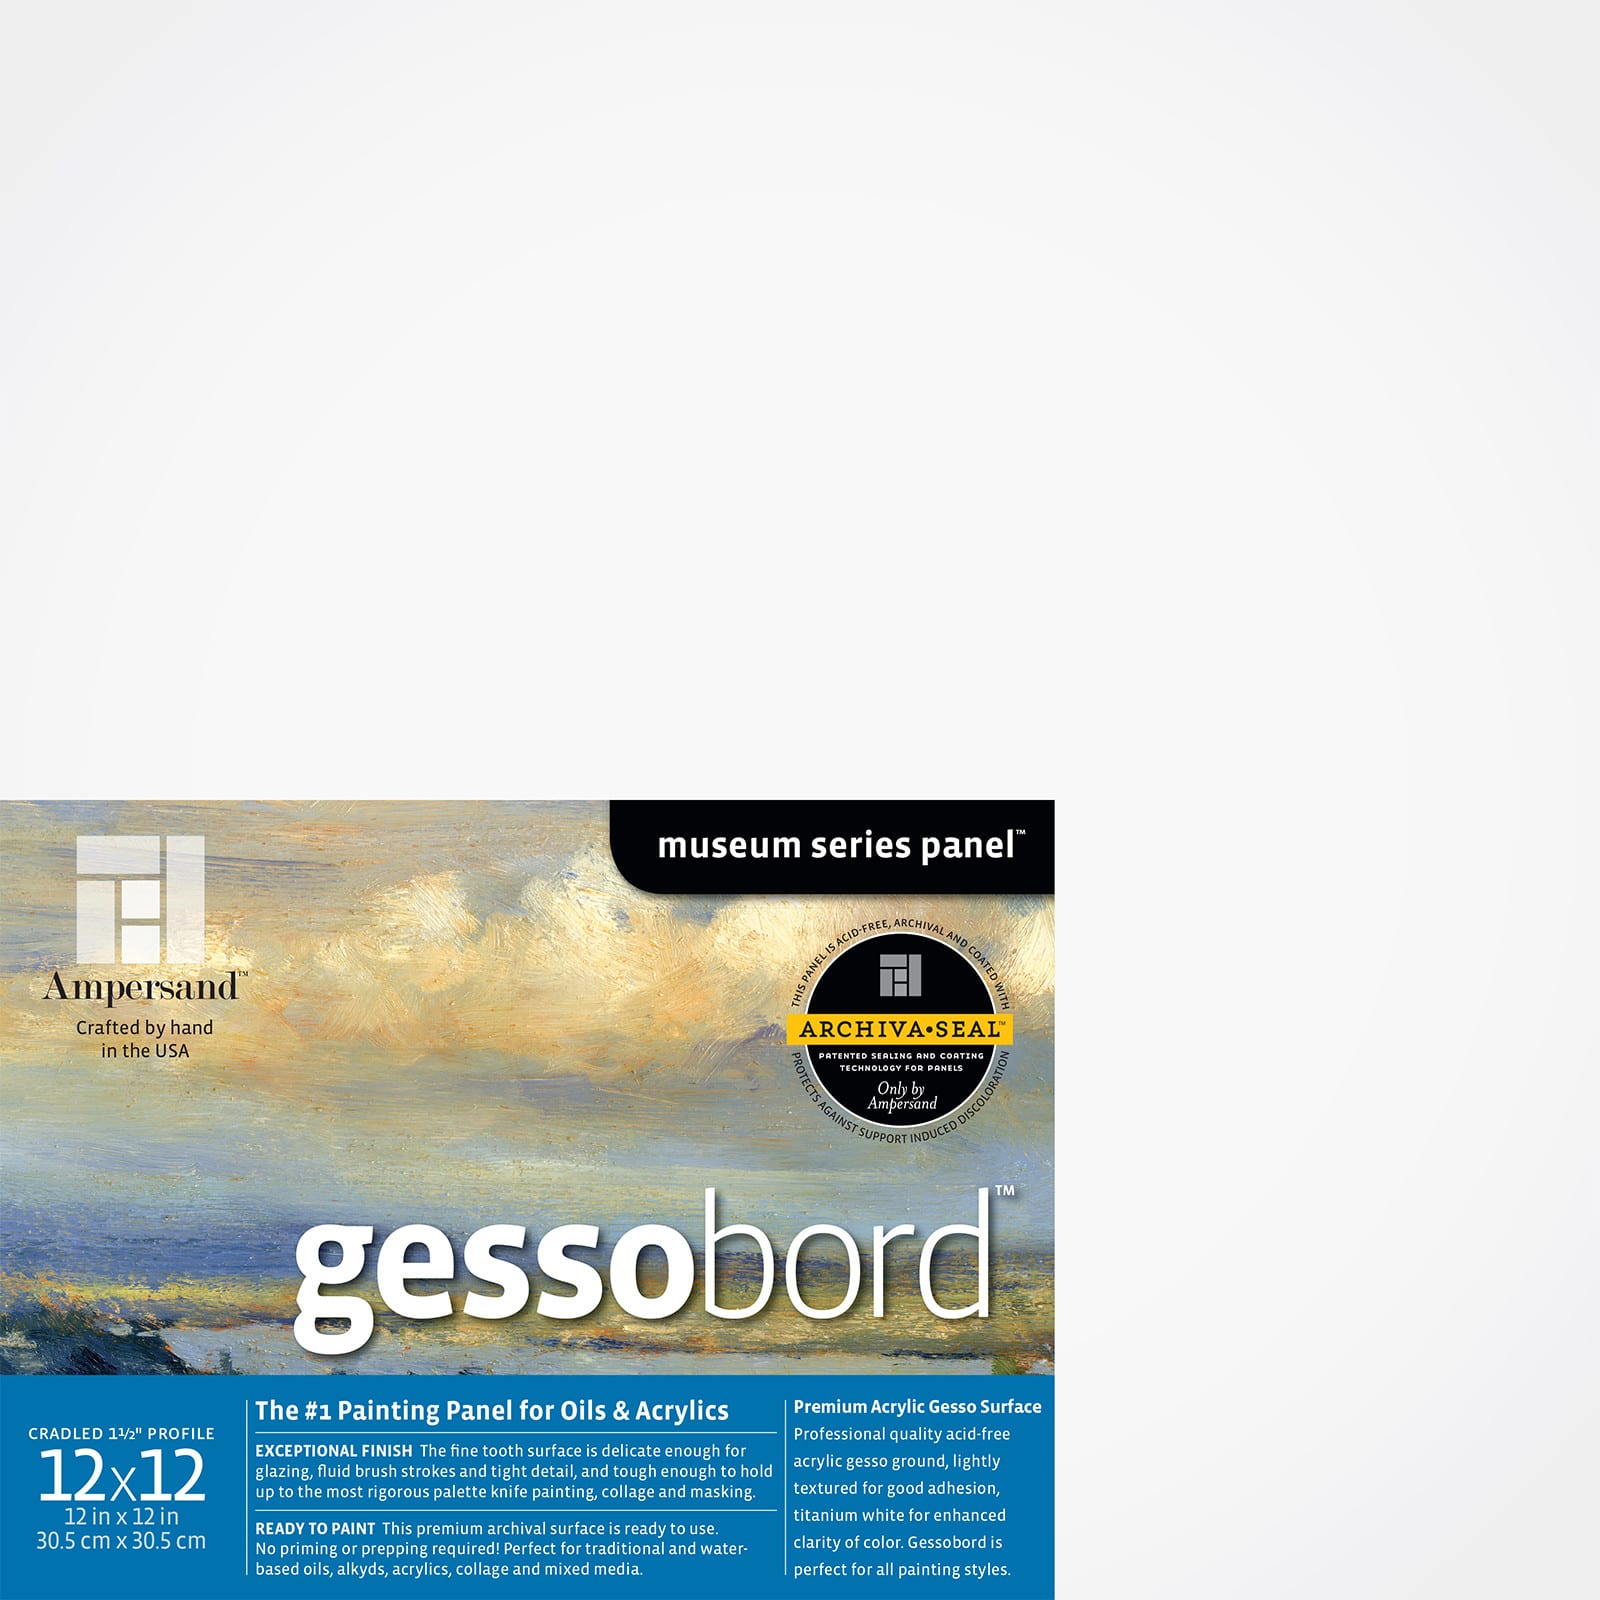 Ampersand™ Gessobord™ Museum Series Cradled 1.5 Profile Panel in White, 30 x 30